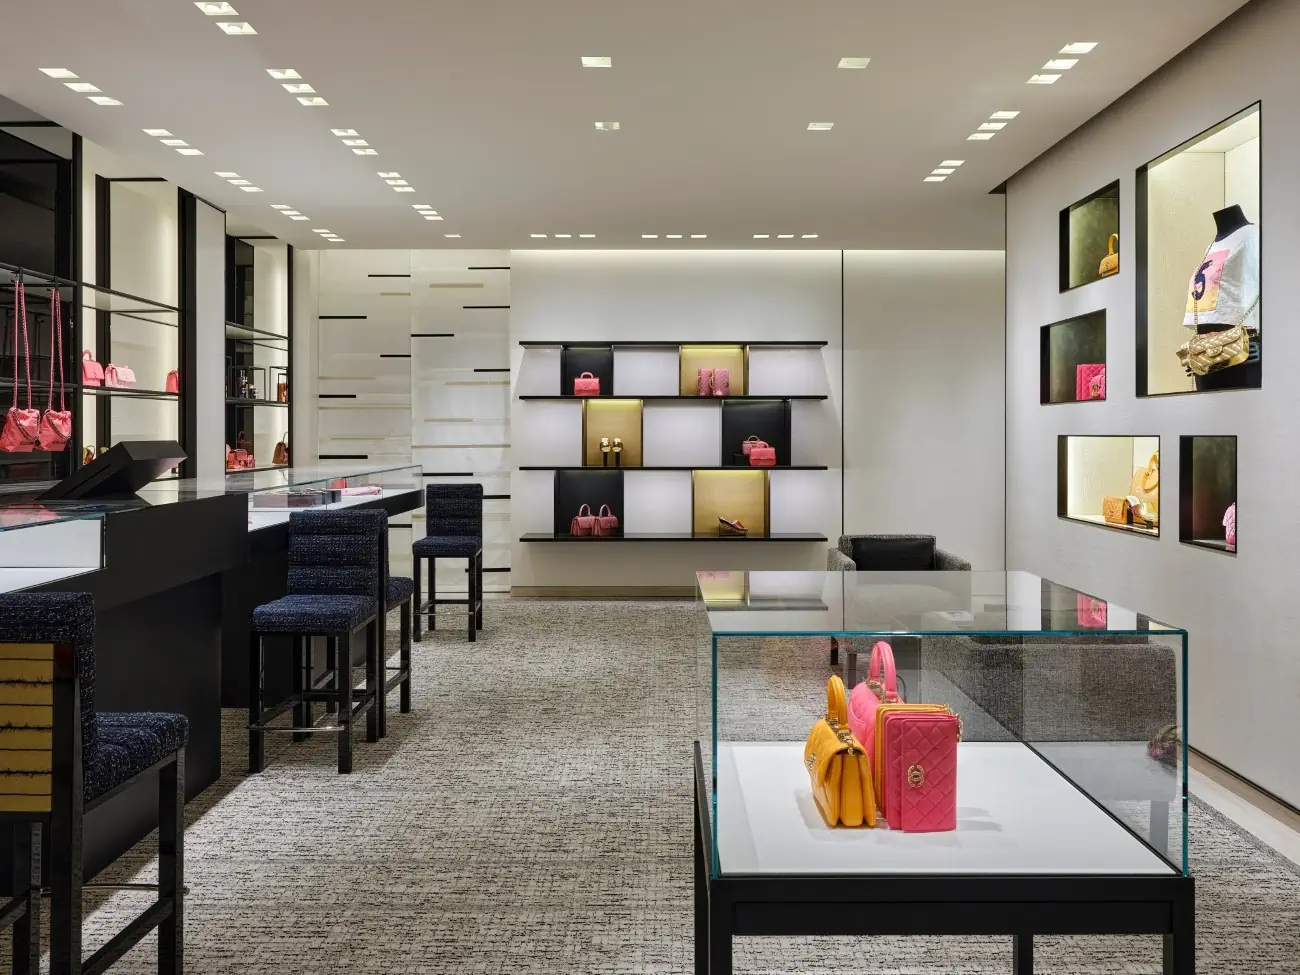 Chanel opens Italy's first 'twin' boutique in Milan's fashion capital